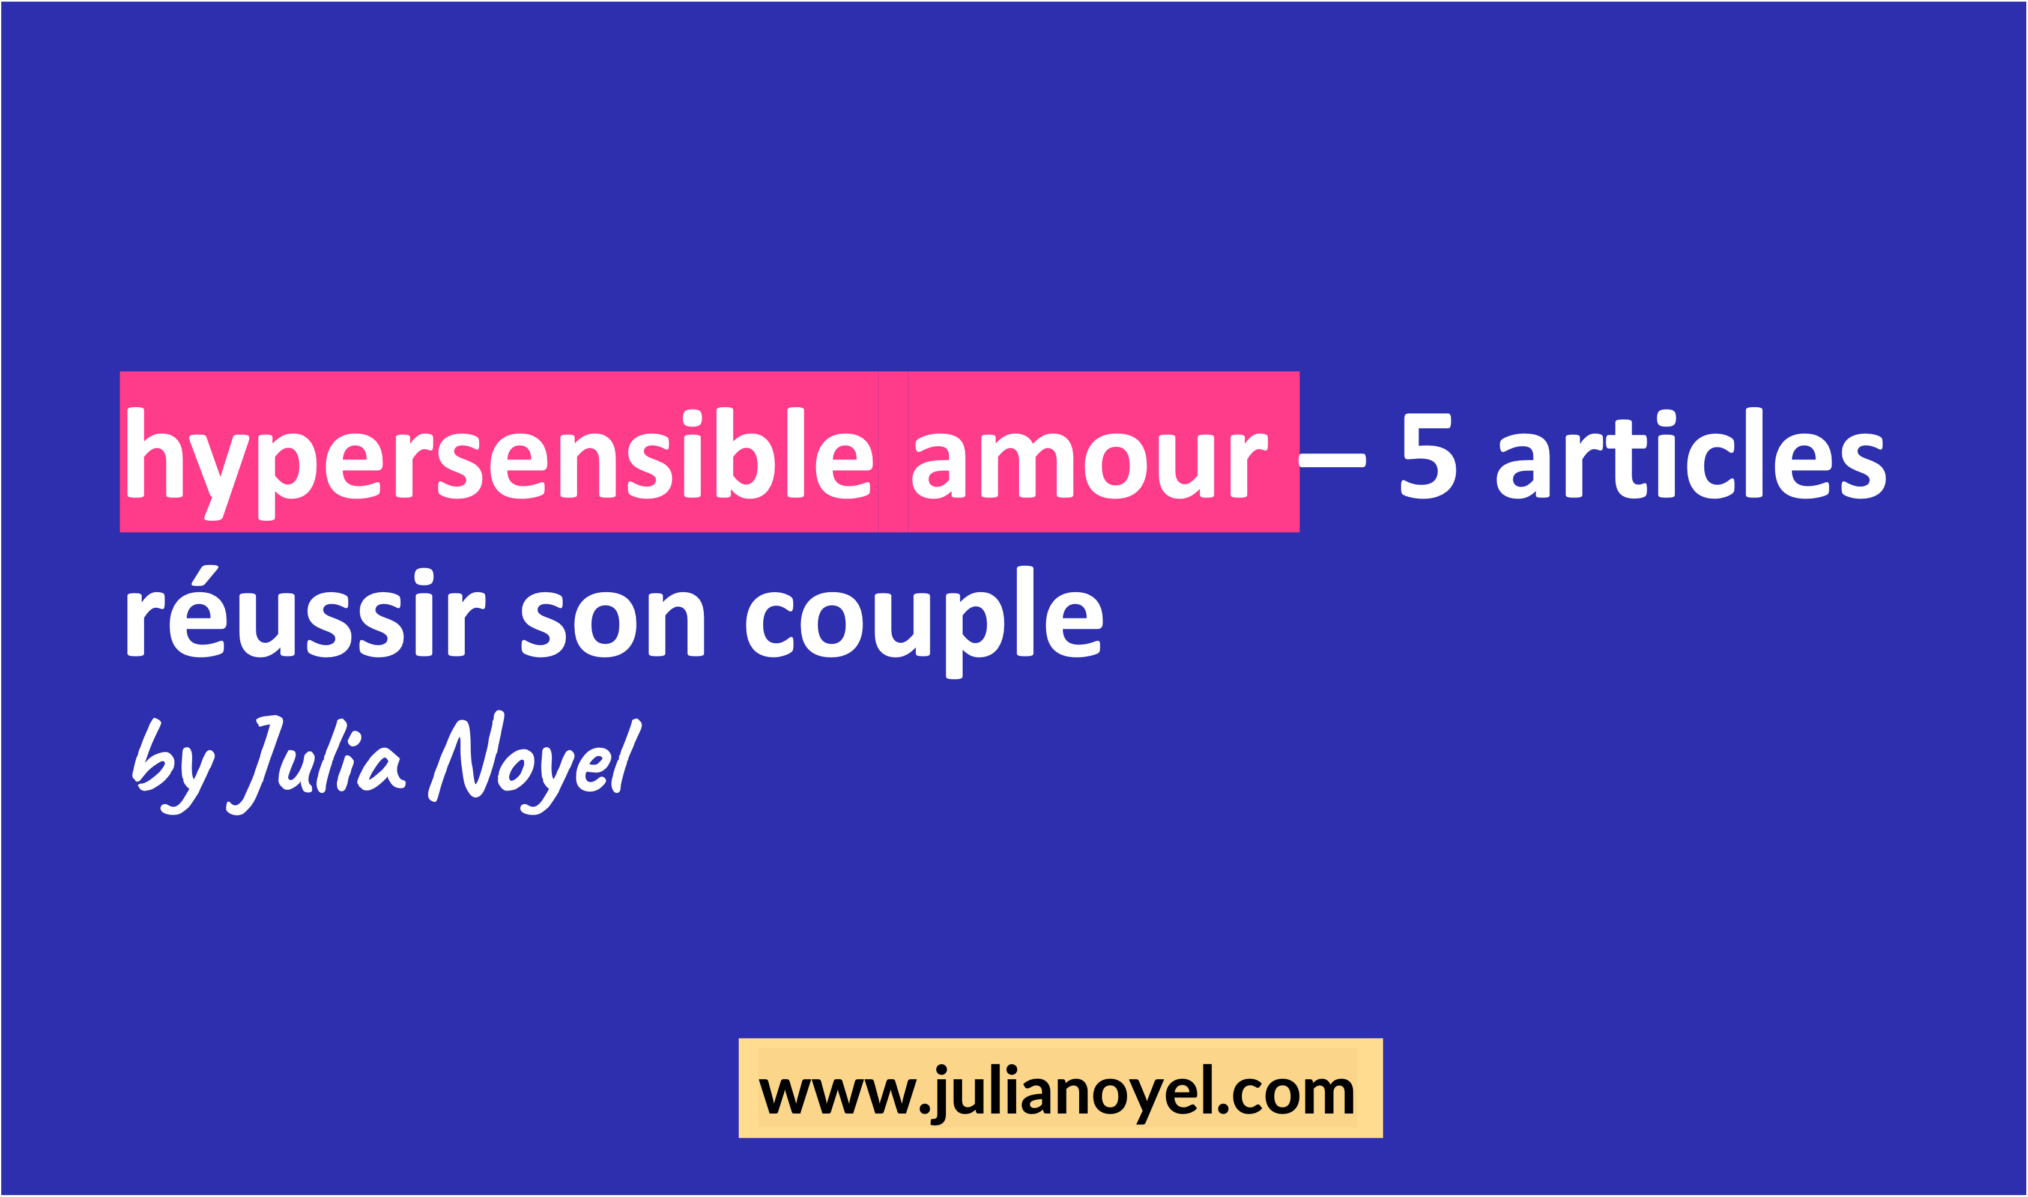 hypersensible amour – 5 articles réussir son couple by Julia Noyel